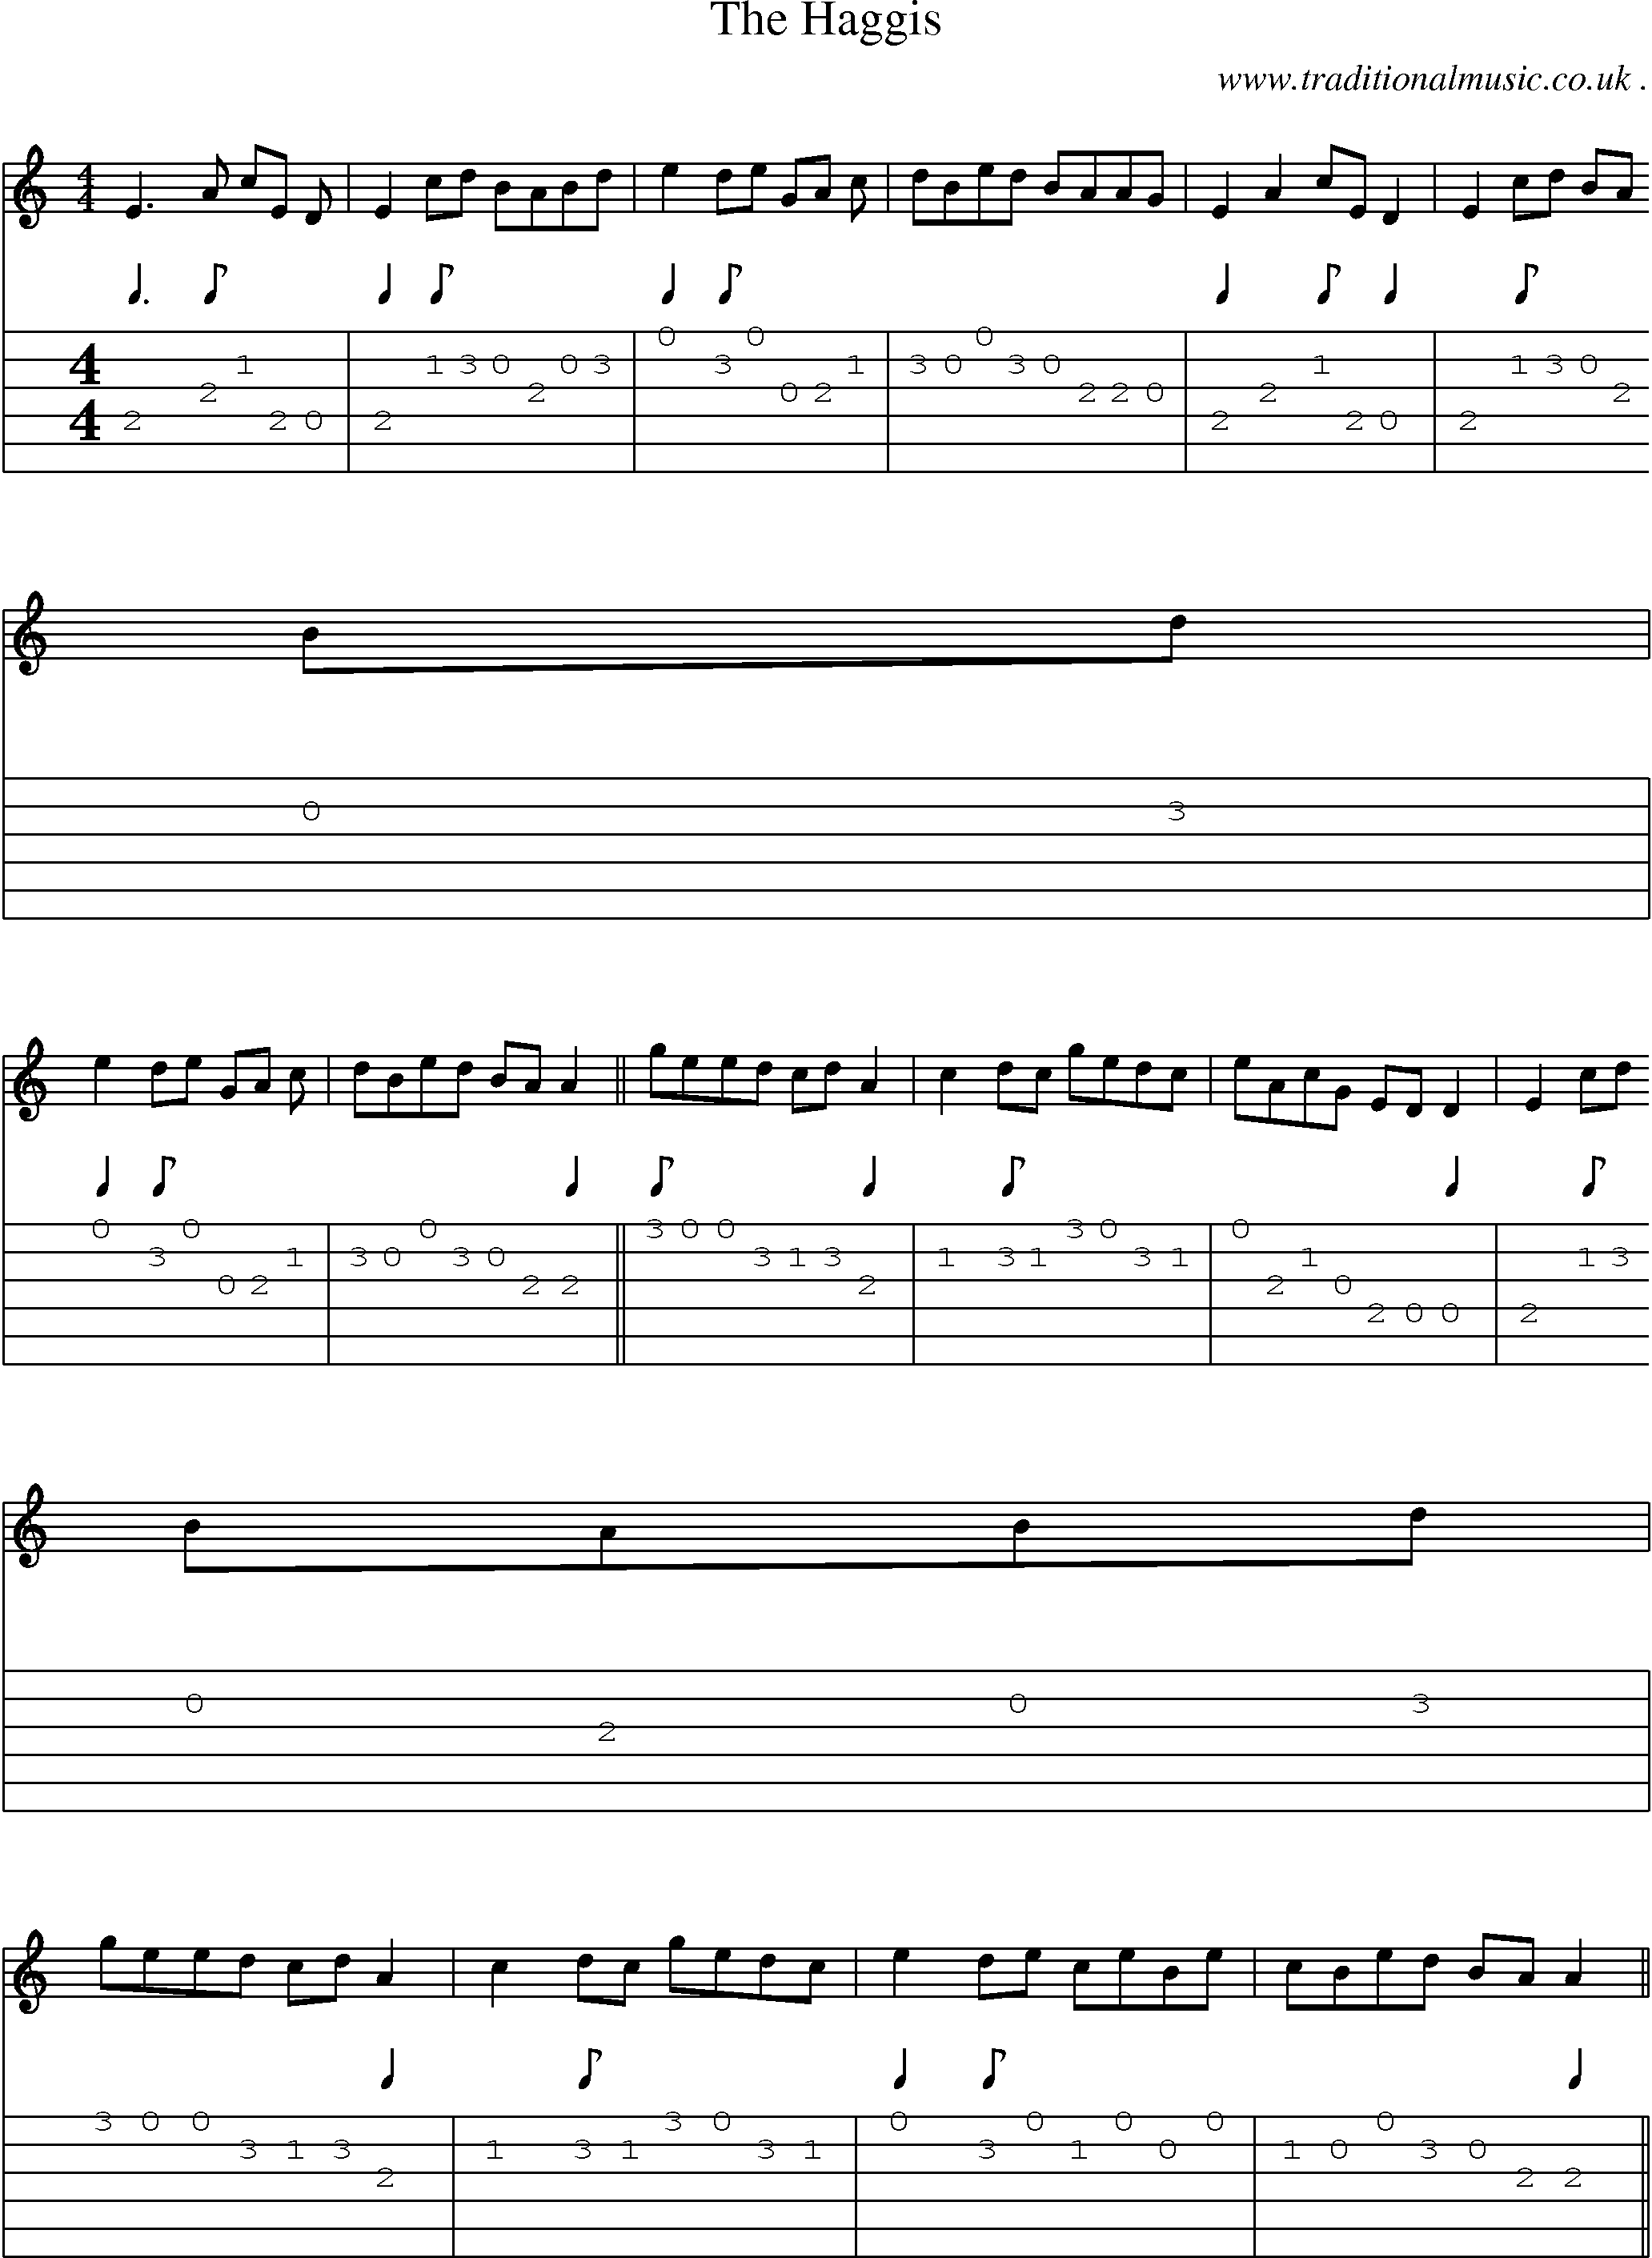 Sheet-music  score, Chords and Guitar Tabs for The Haggis